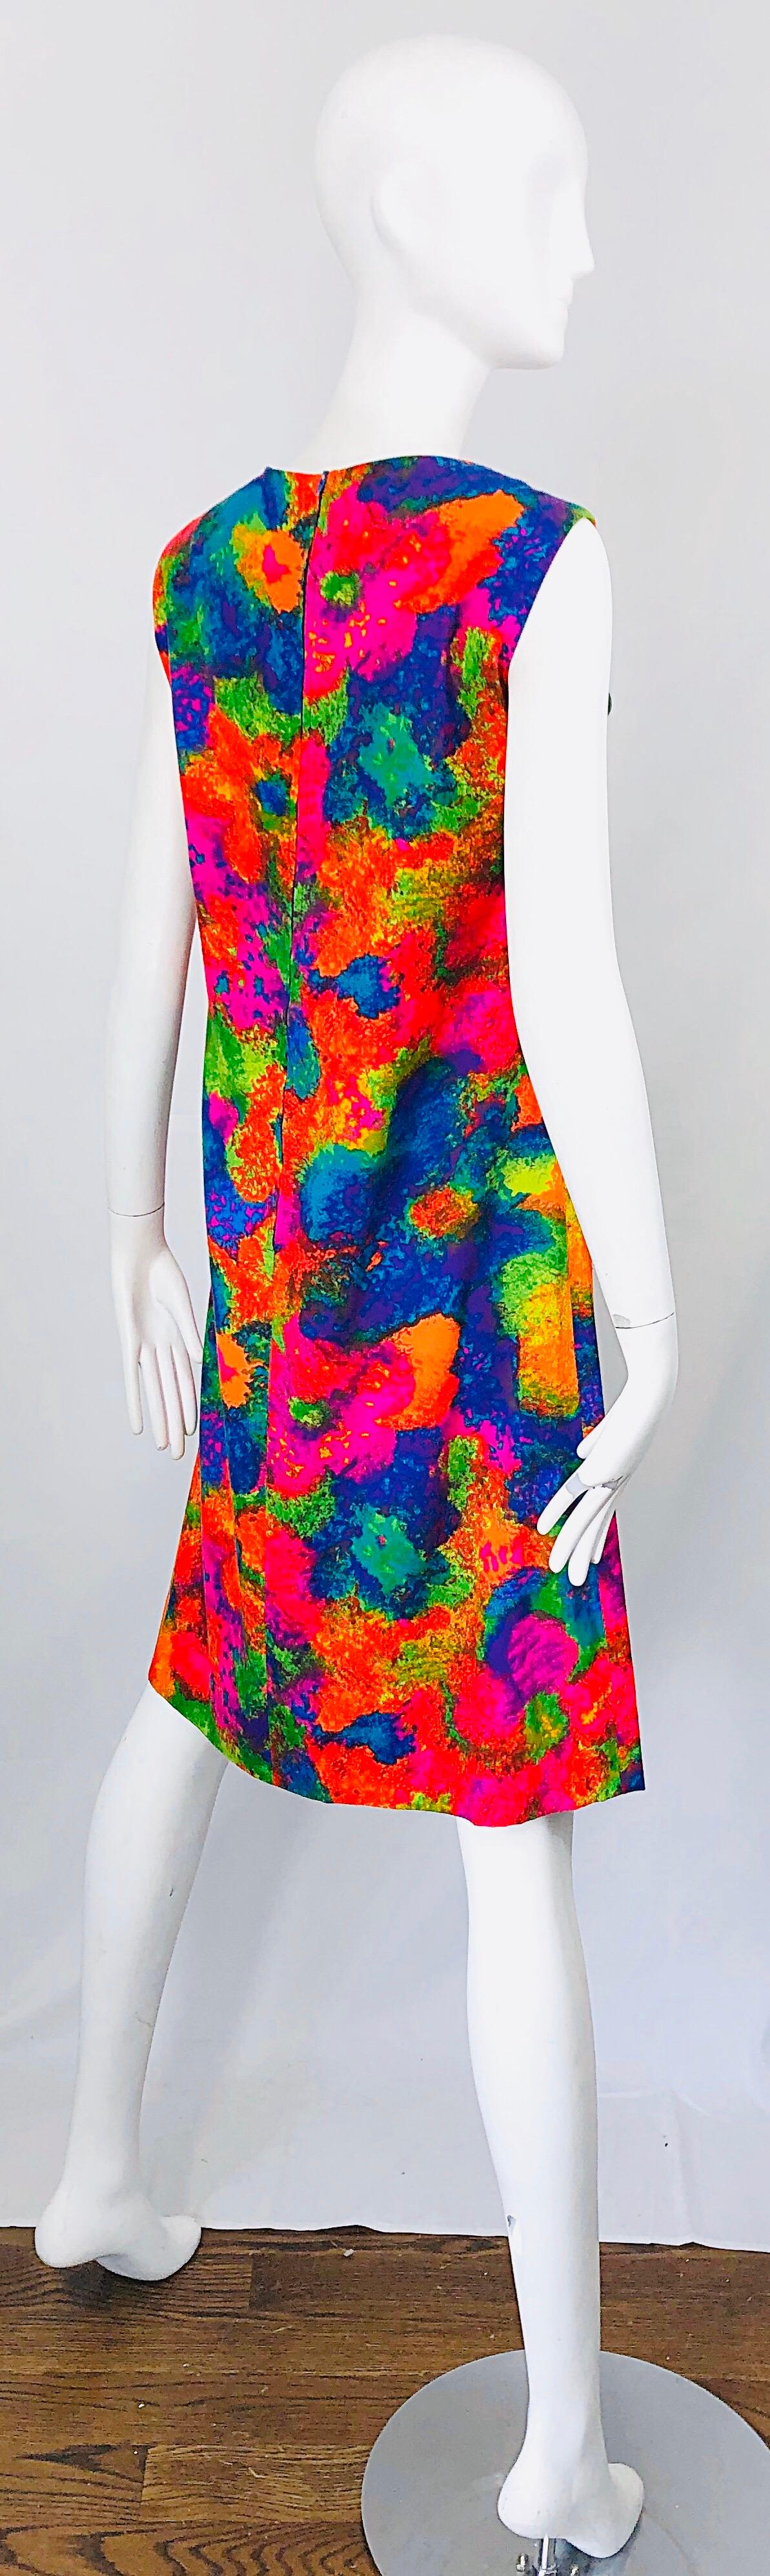 neon abstract dress